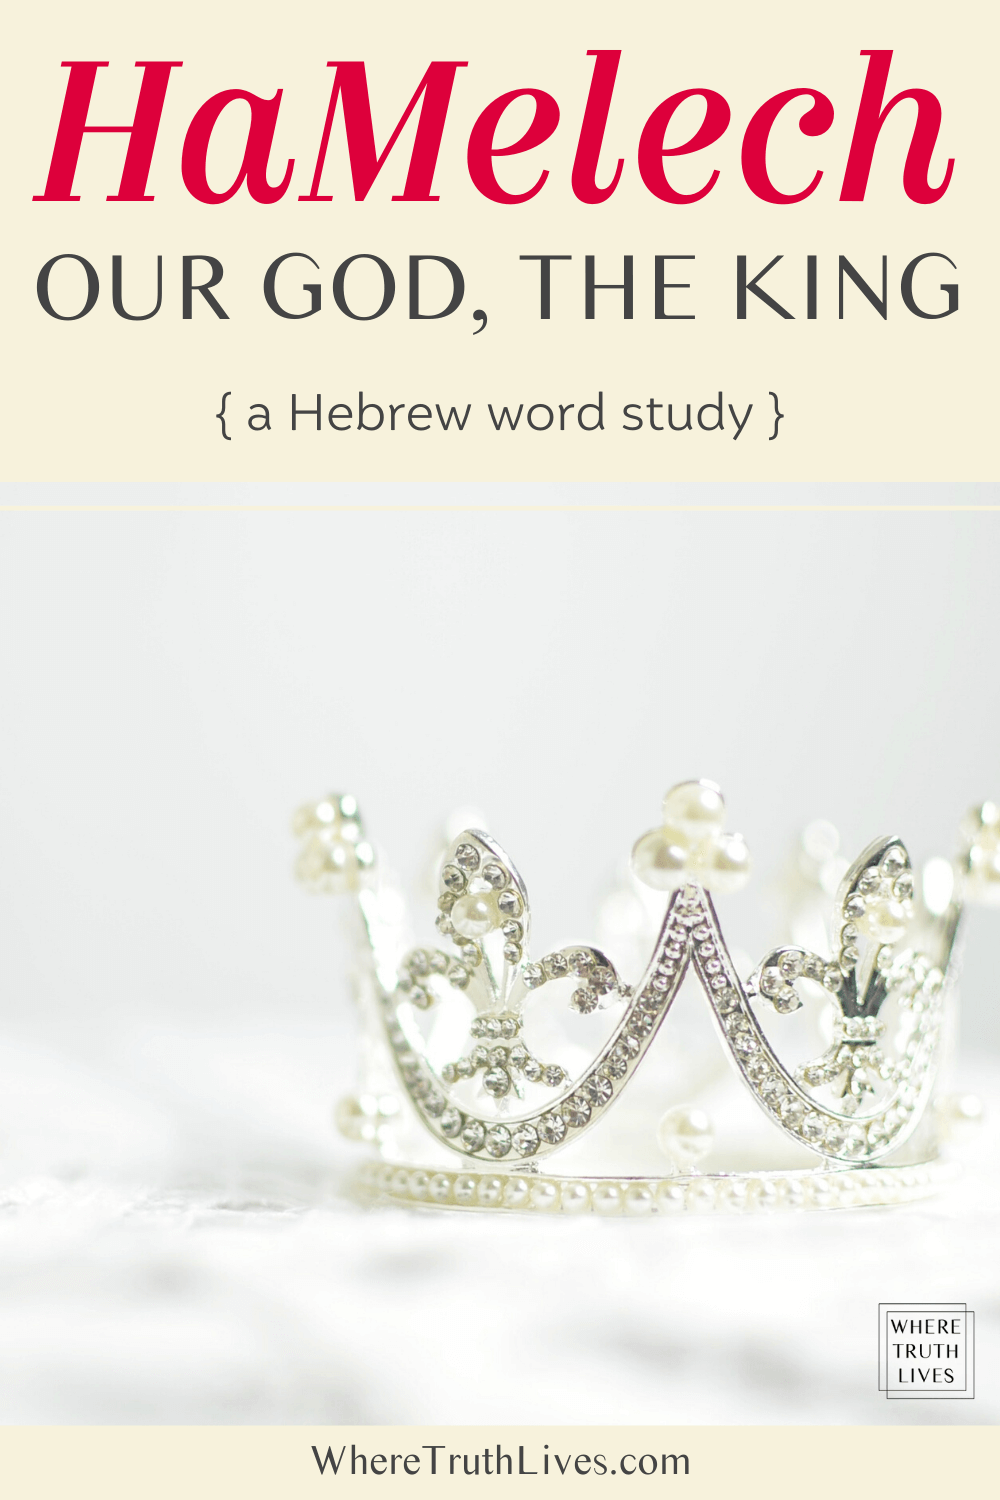 A short Hebrew word study on HaMelech, the King, looking at both the Old Testament and New Testament to discover and declare that our God reigns - forever!